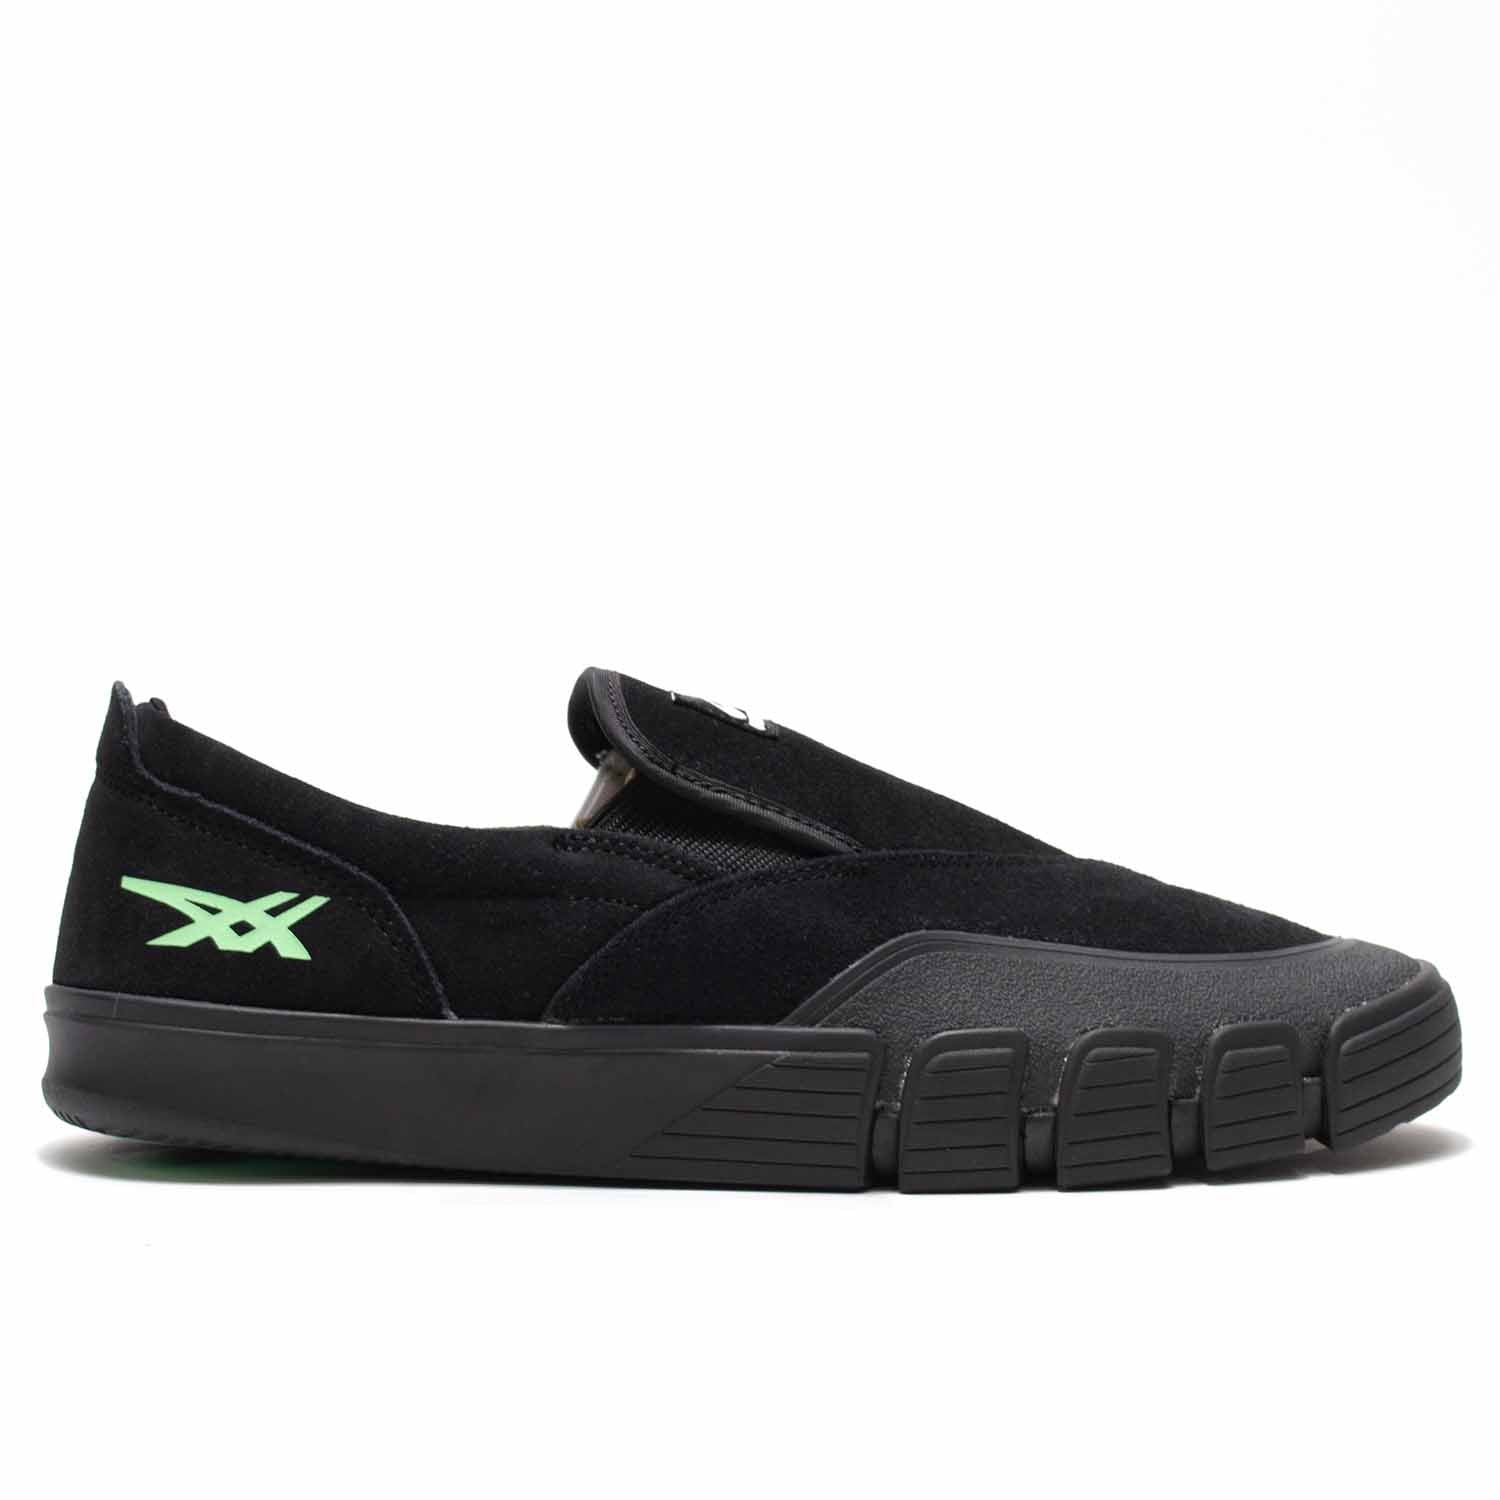 Asics Black slip on shoe with black sole and green asics logo. Chunky outer sole. Suede shoe. Black rubber toe cap.